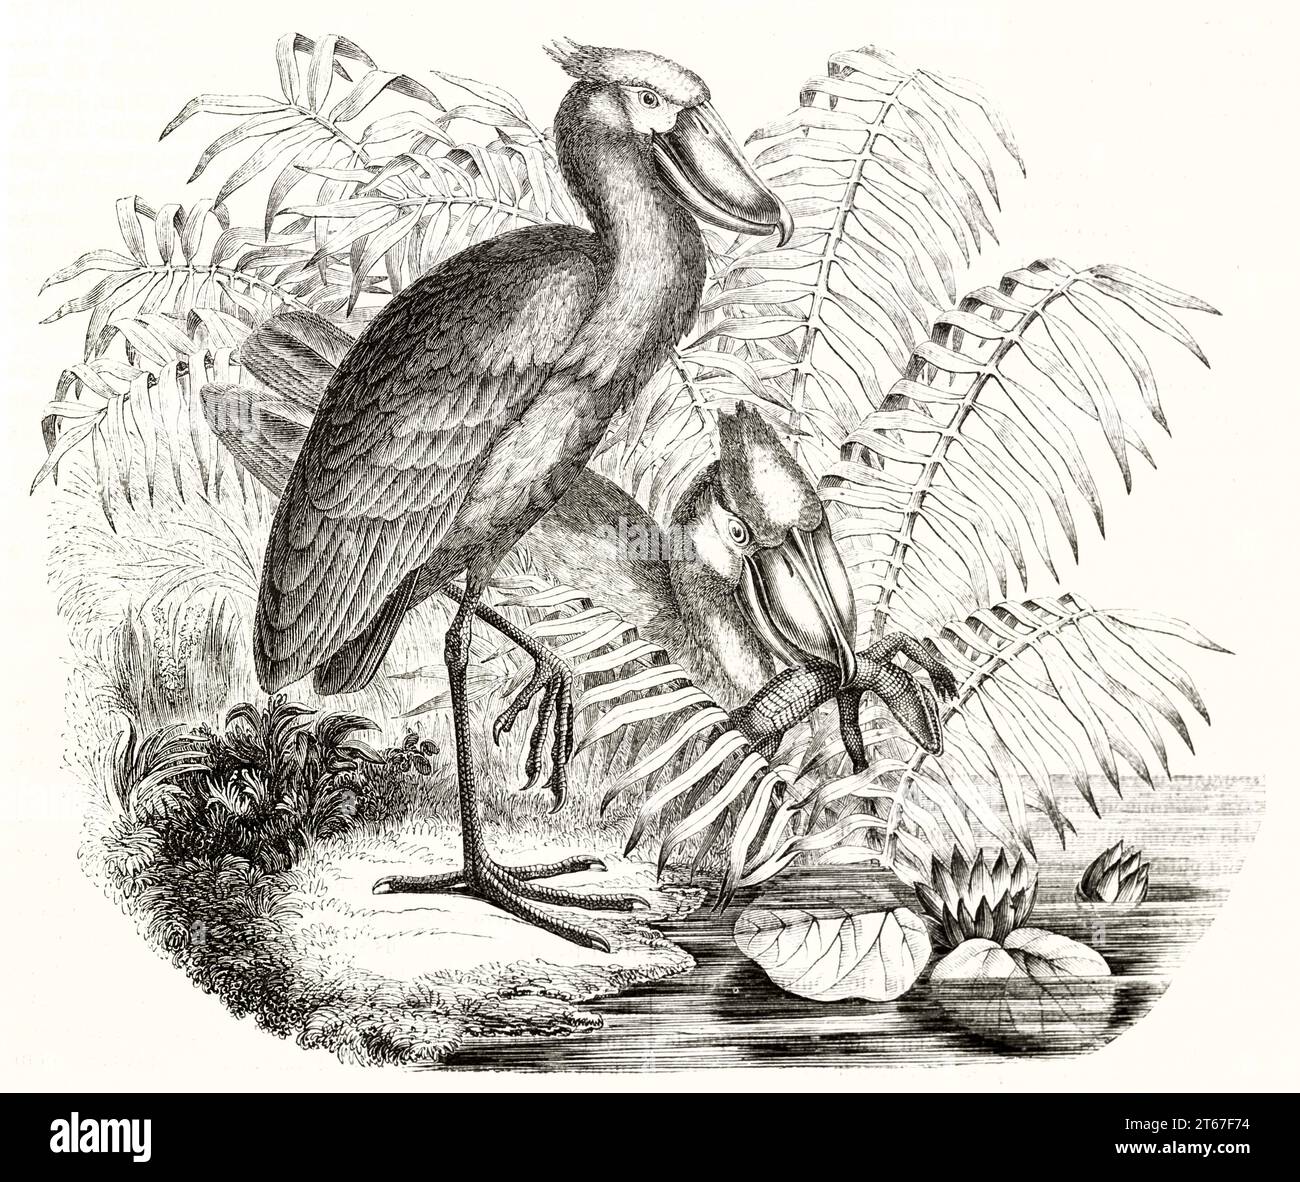 Old illustration of Shoebill (Balaniceps rex). By Oudart, publ. on Magasin Pittoresque, Paris, 1851 Stock Photo